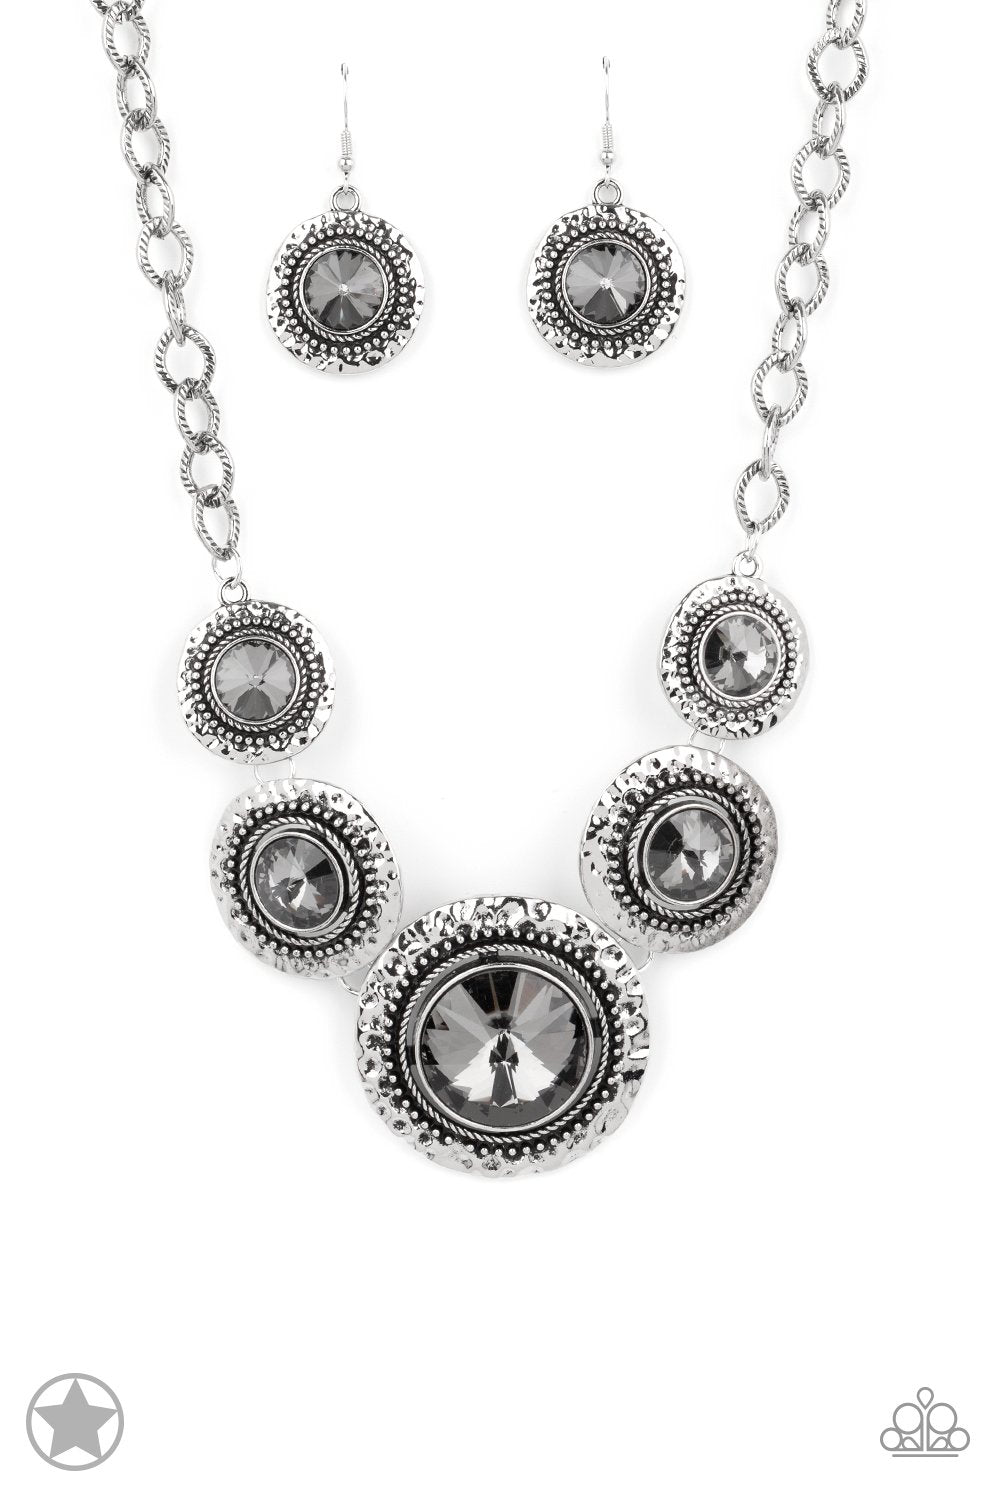 Global Glamour Silver and Smoky Gem Necklace and matching Earrings - Paparazzi Accessories - lightbox -CarasShop.com - $5 Jewelry by Cara Jewels